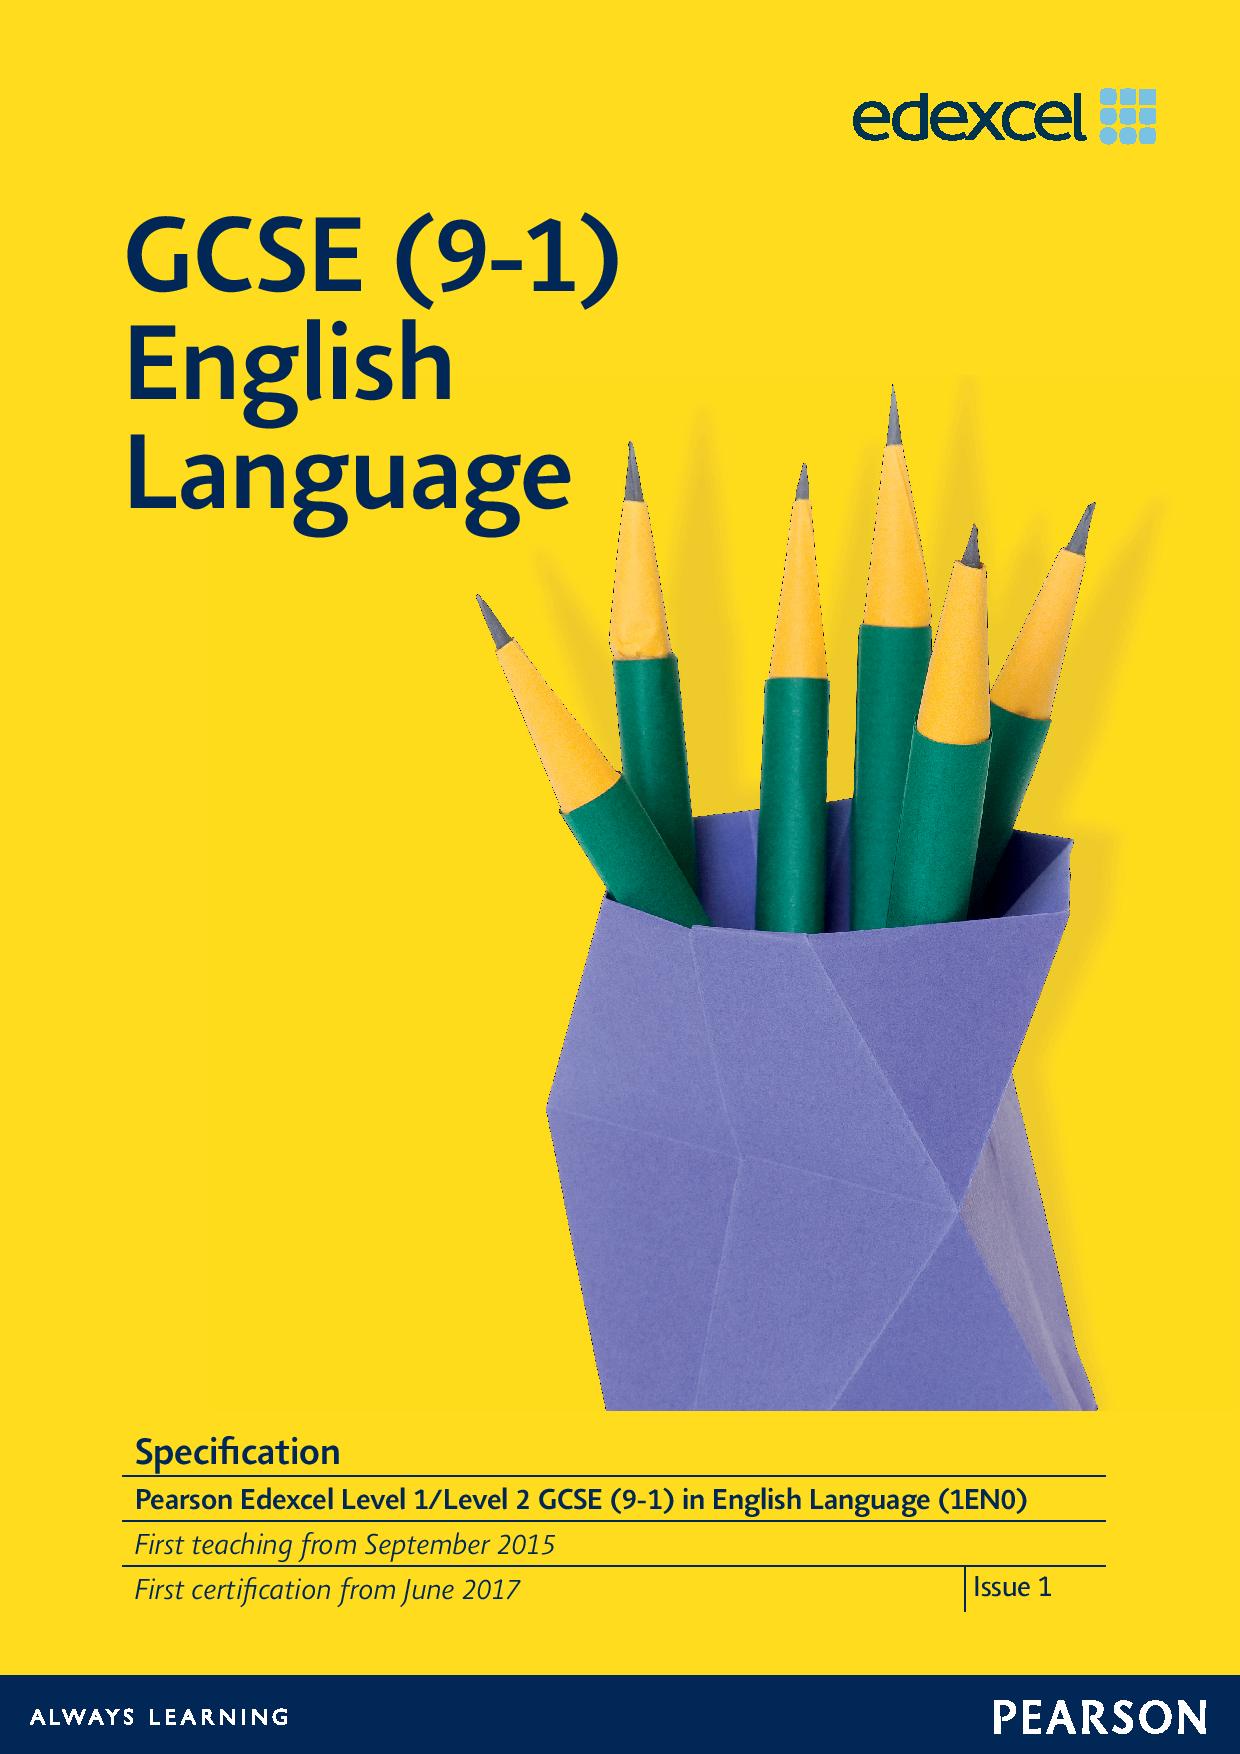 Link to GCSE (9-1) English Language specification page